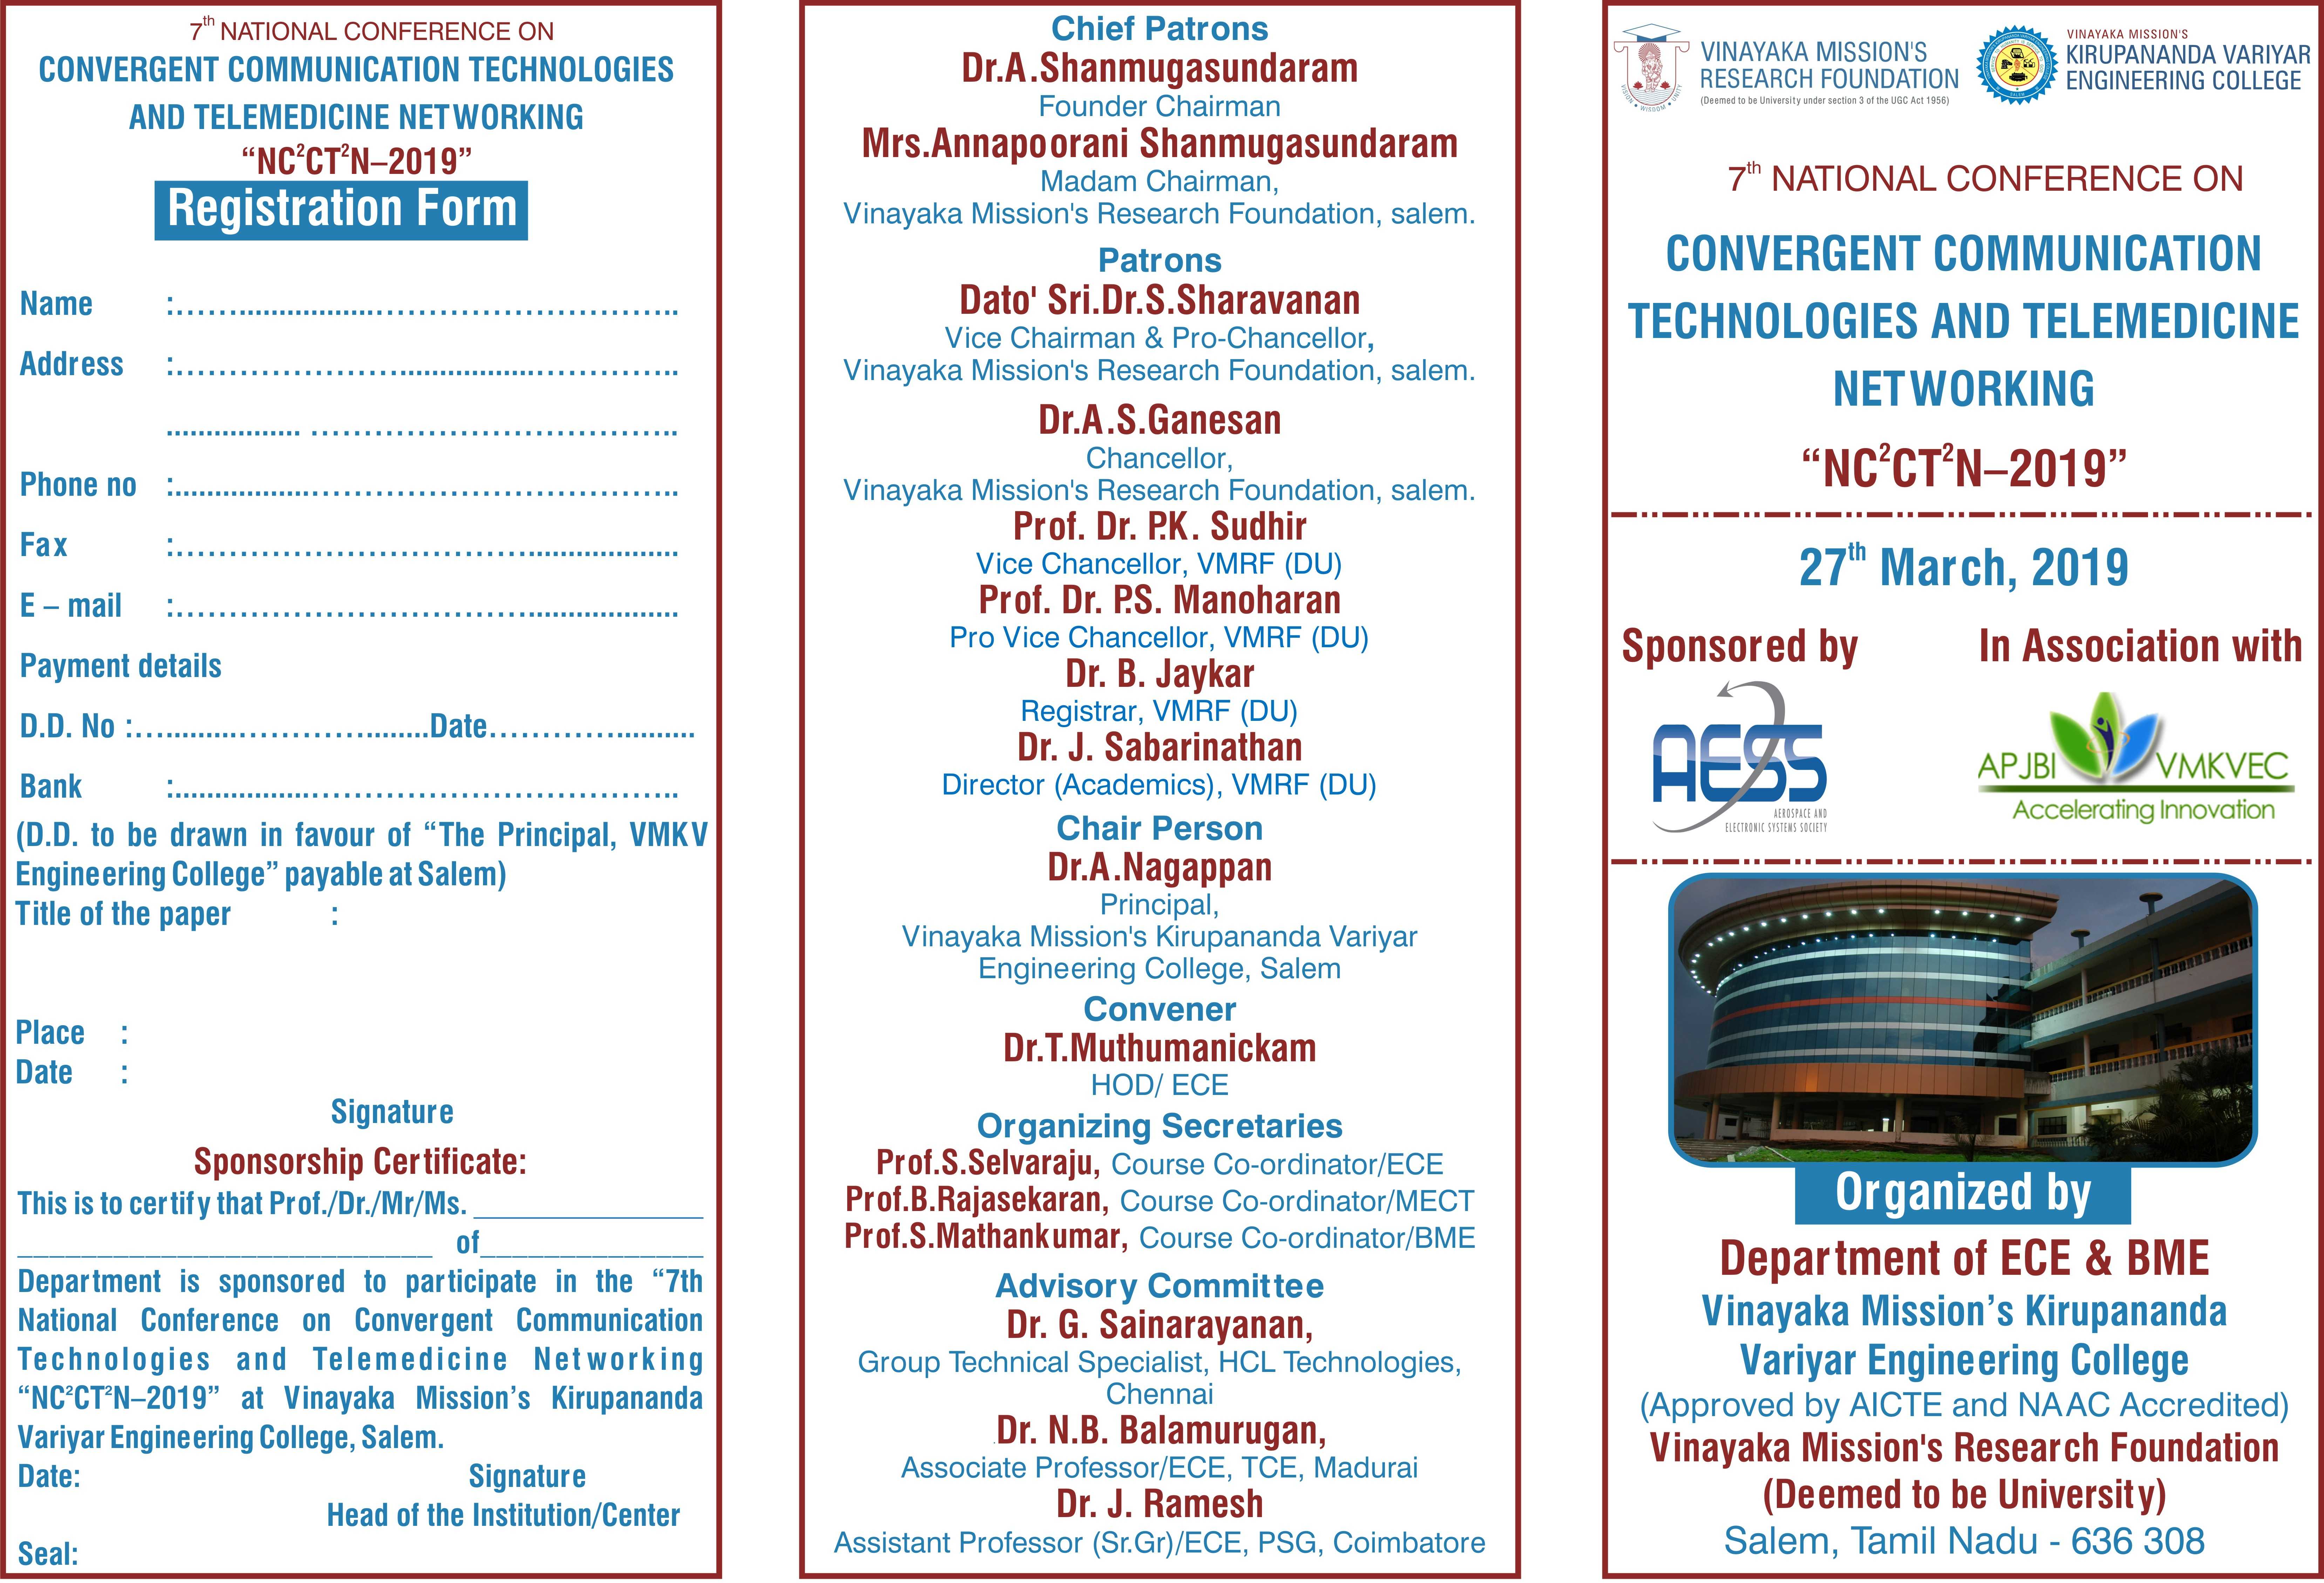 7th National conference on convergent communication technologies and telemedicine networking, Salem, Tamil Nadu, India